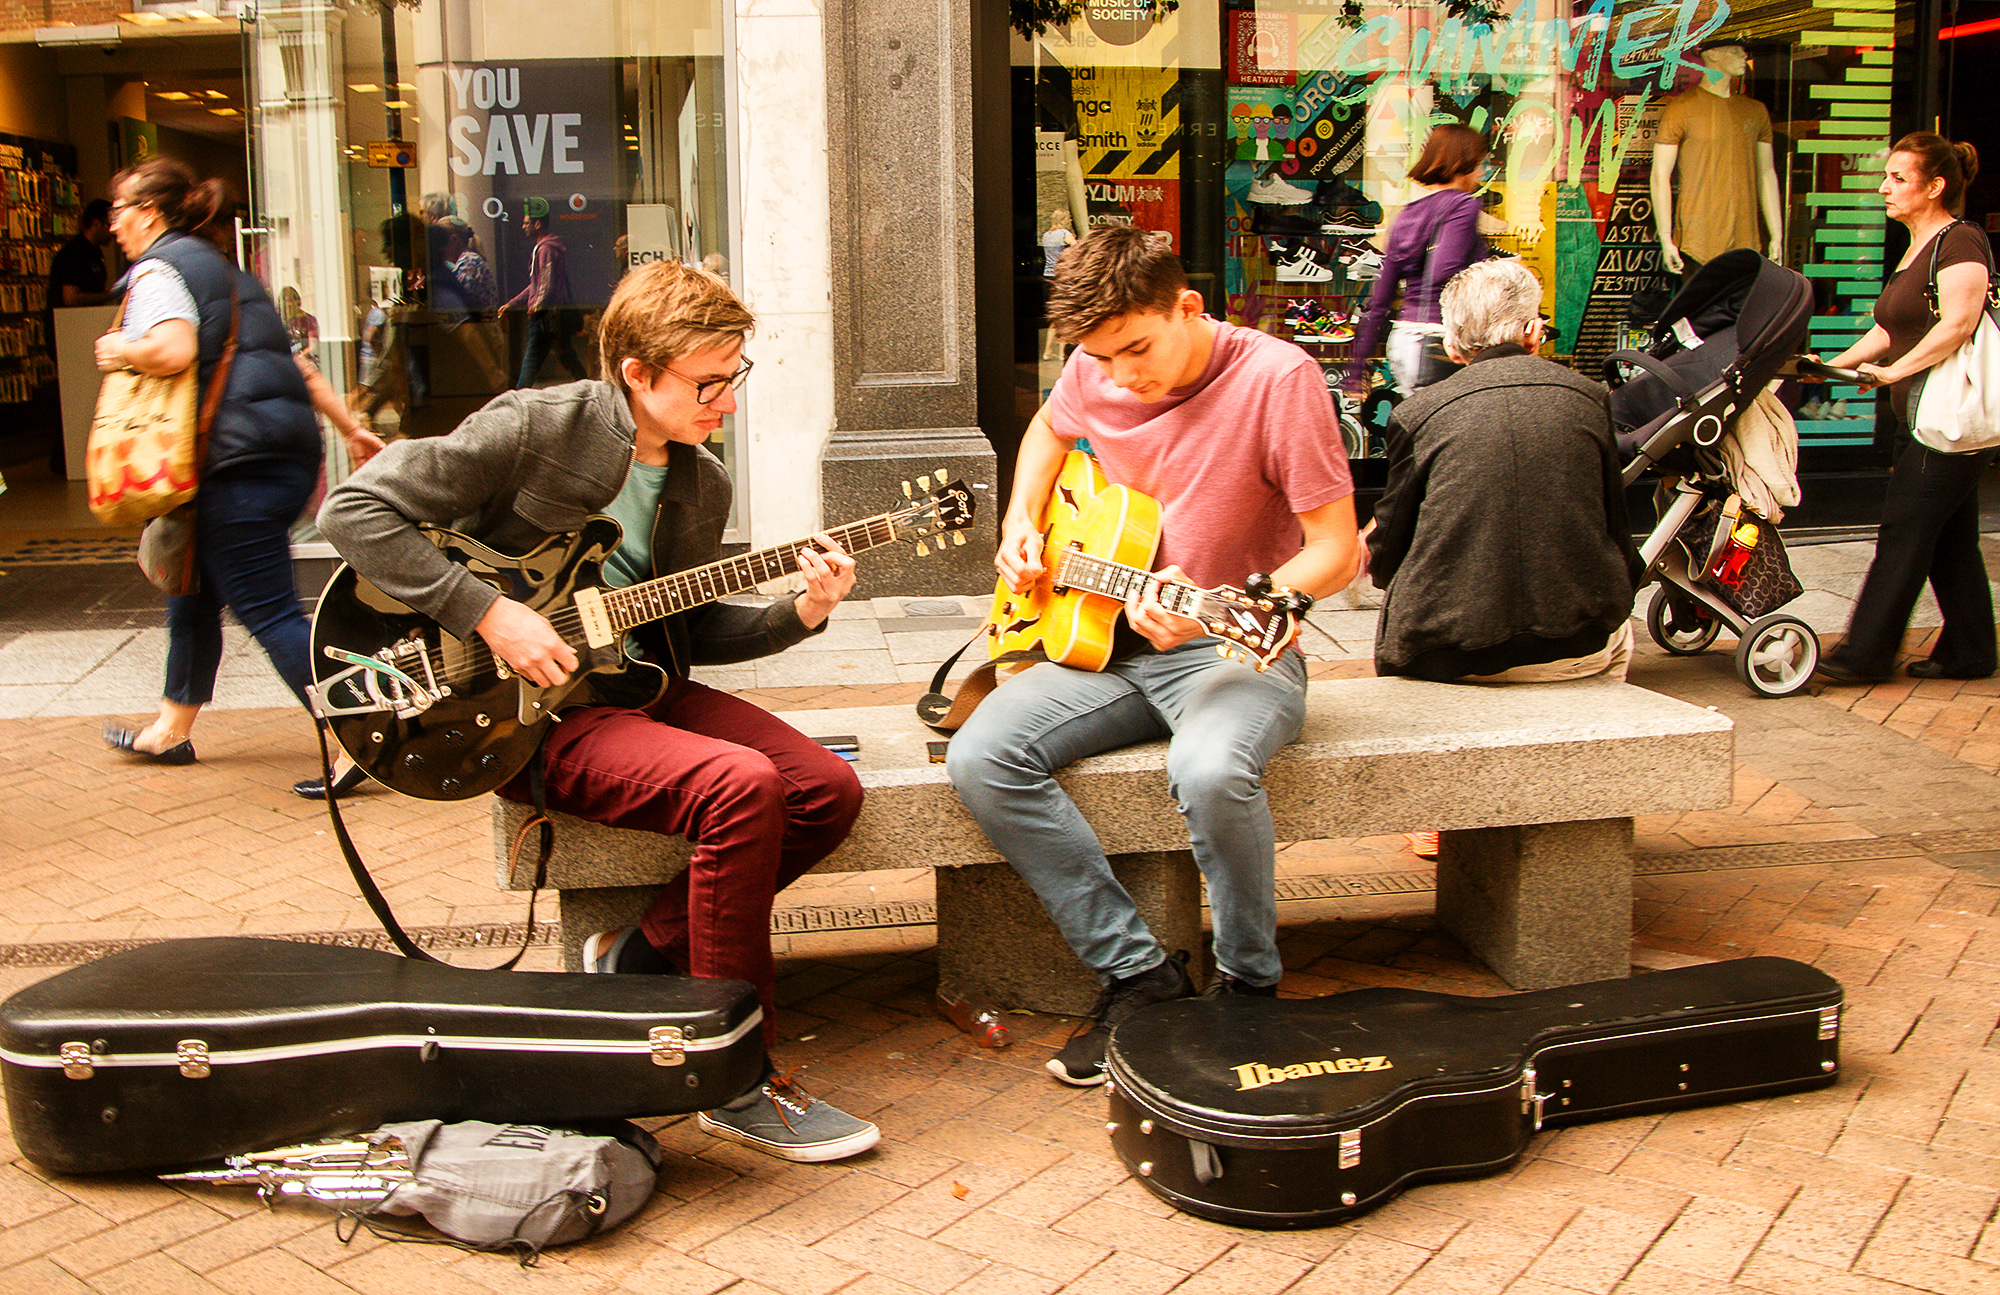 4939-KIngston-musical-talent-on-the-street